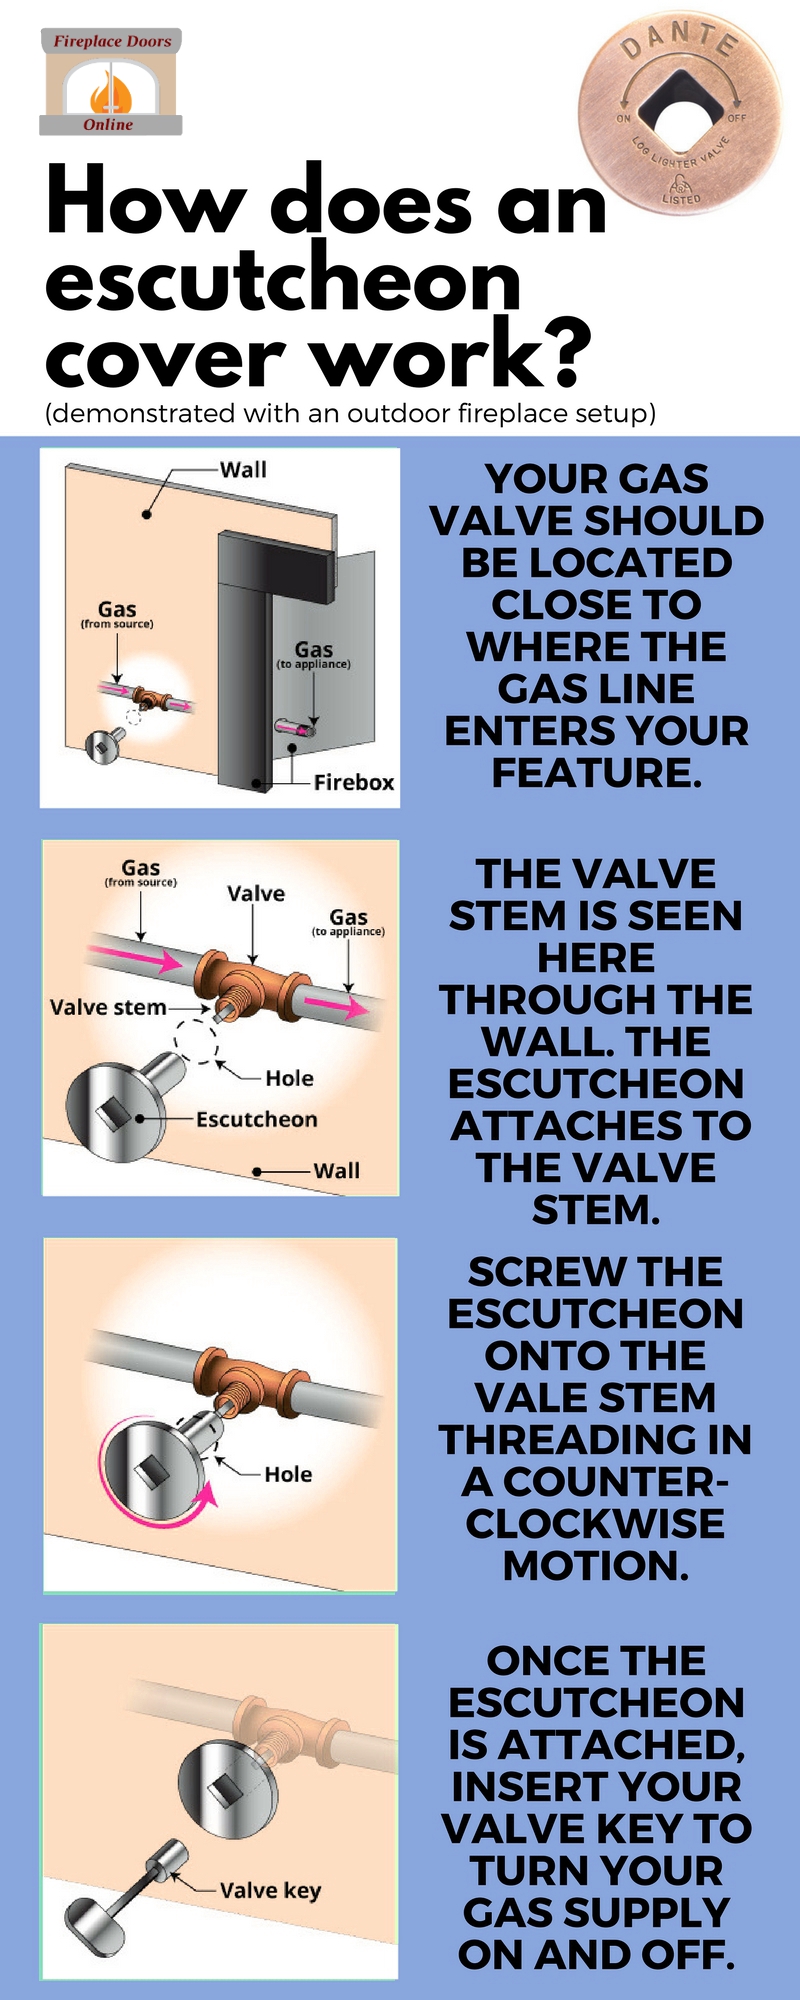 How Does An Escutcheon Work? - infographic